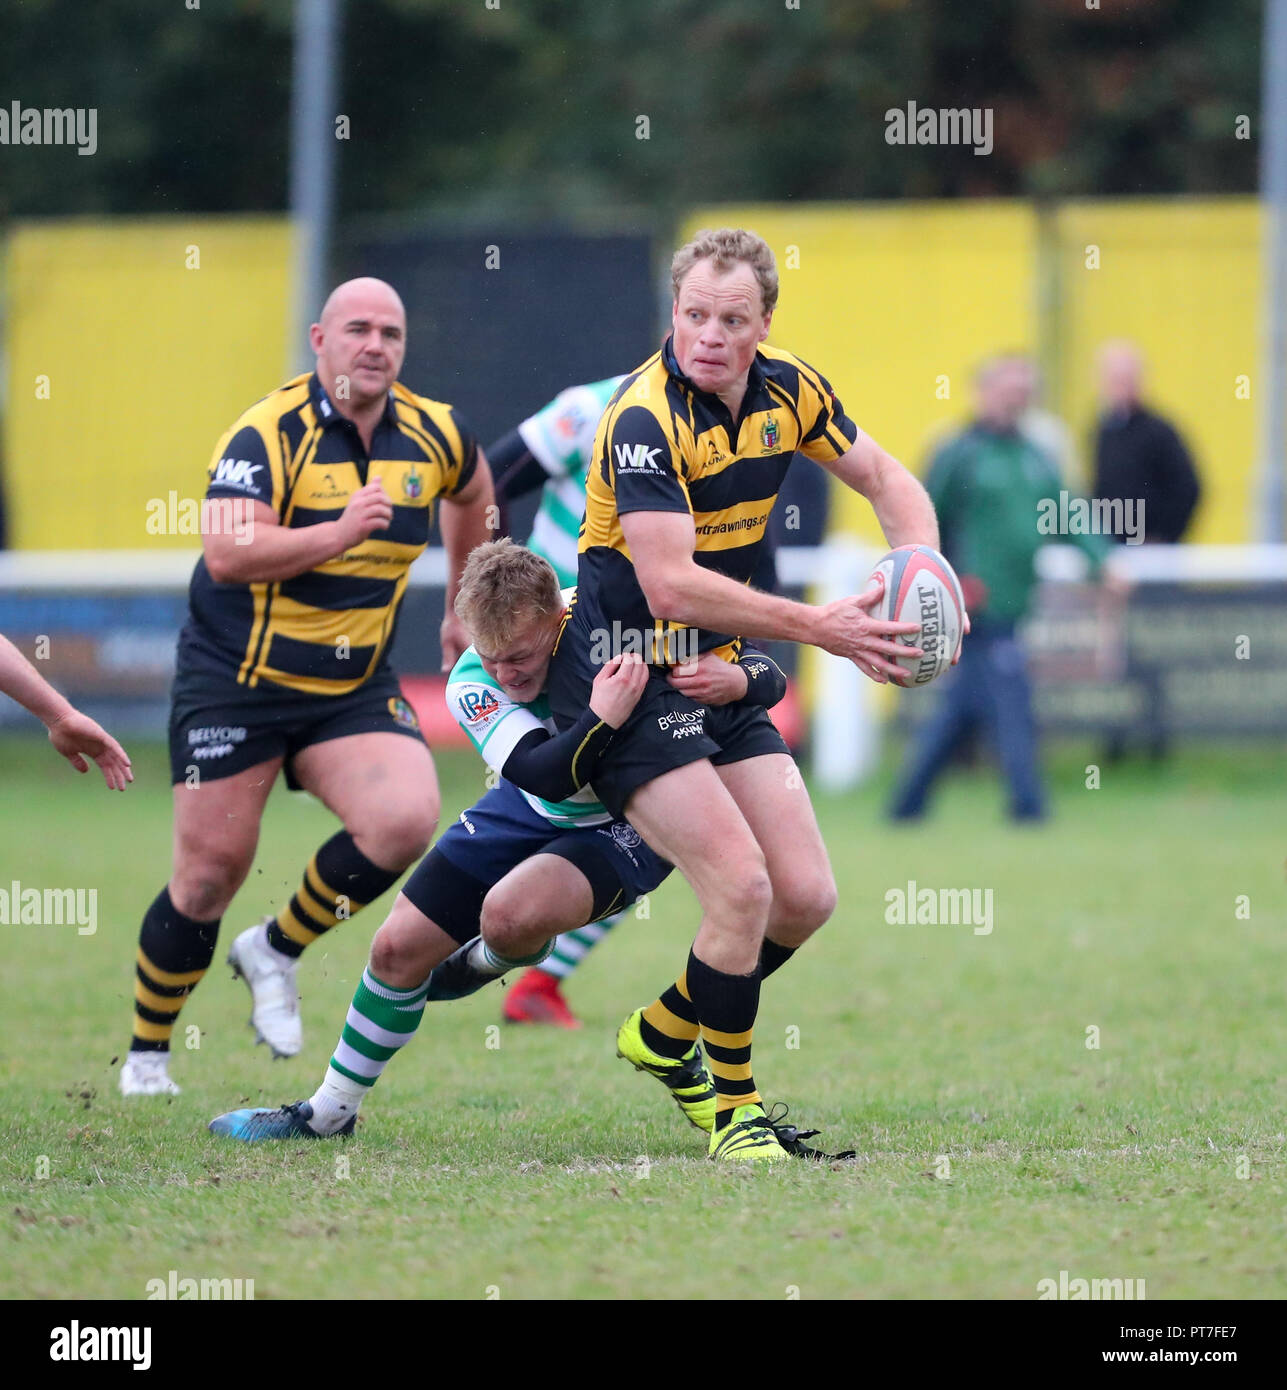 Leicester, England. Rugby Union, Hinckley rfc v South Leicester rfc.  Scott Hamilton on the charge for Hinckley during the RFU National League 2 North (NL2N) game played at the Leicester  Road Stadium.  © Phil Hutchinson / Alamy Live News Stock Photo